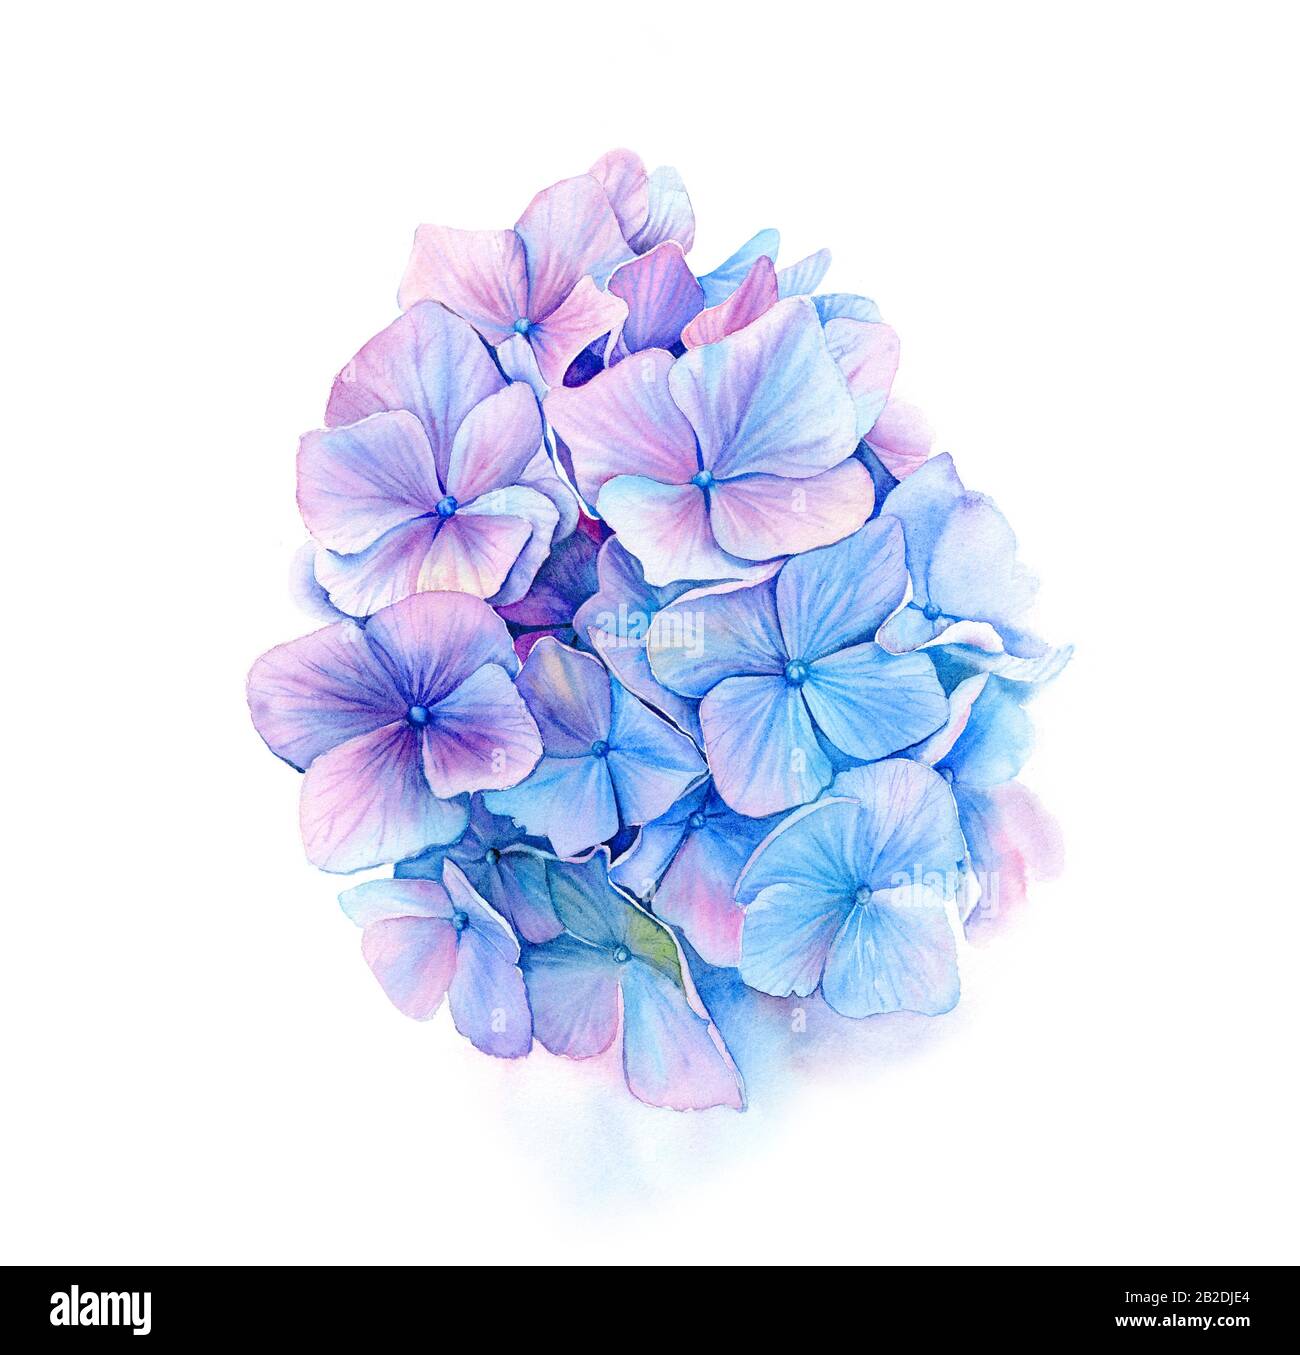 Watercolor blue hydrangea. Big detailed hortensia flowers. Vibrant turquoise and violet color. Hand drawn floral illustration for wedding design Stock Photo